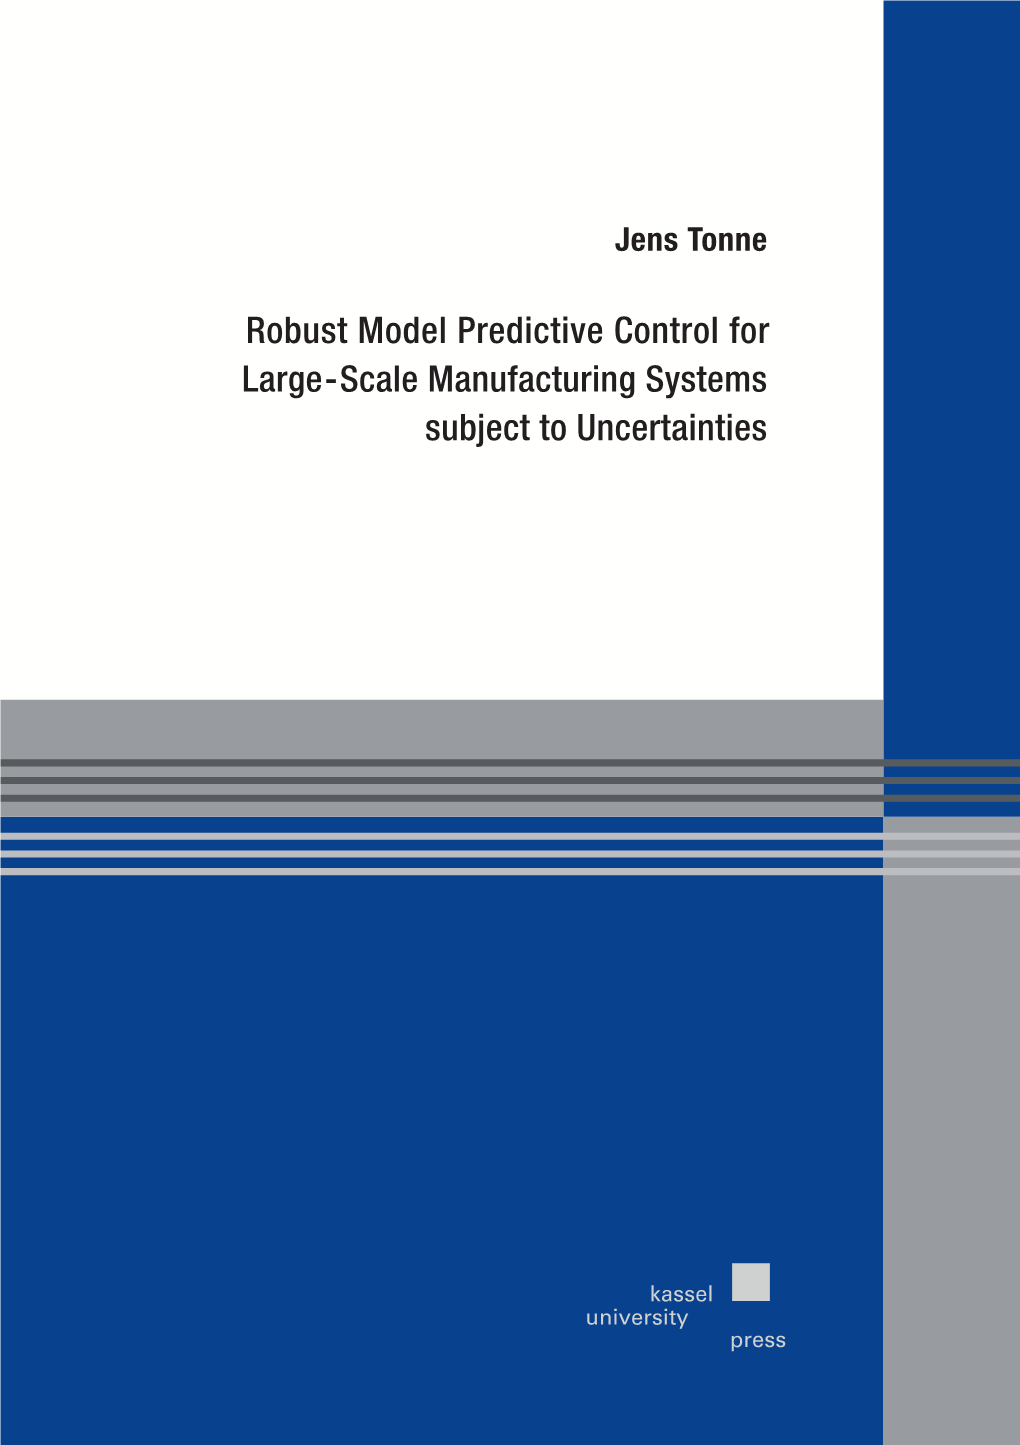 Robust Model Predictive Control for Large